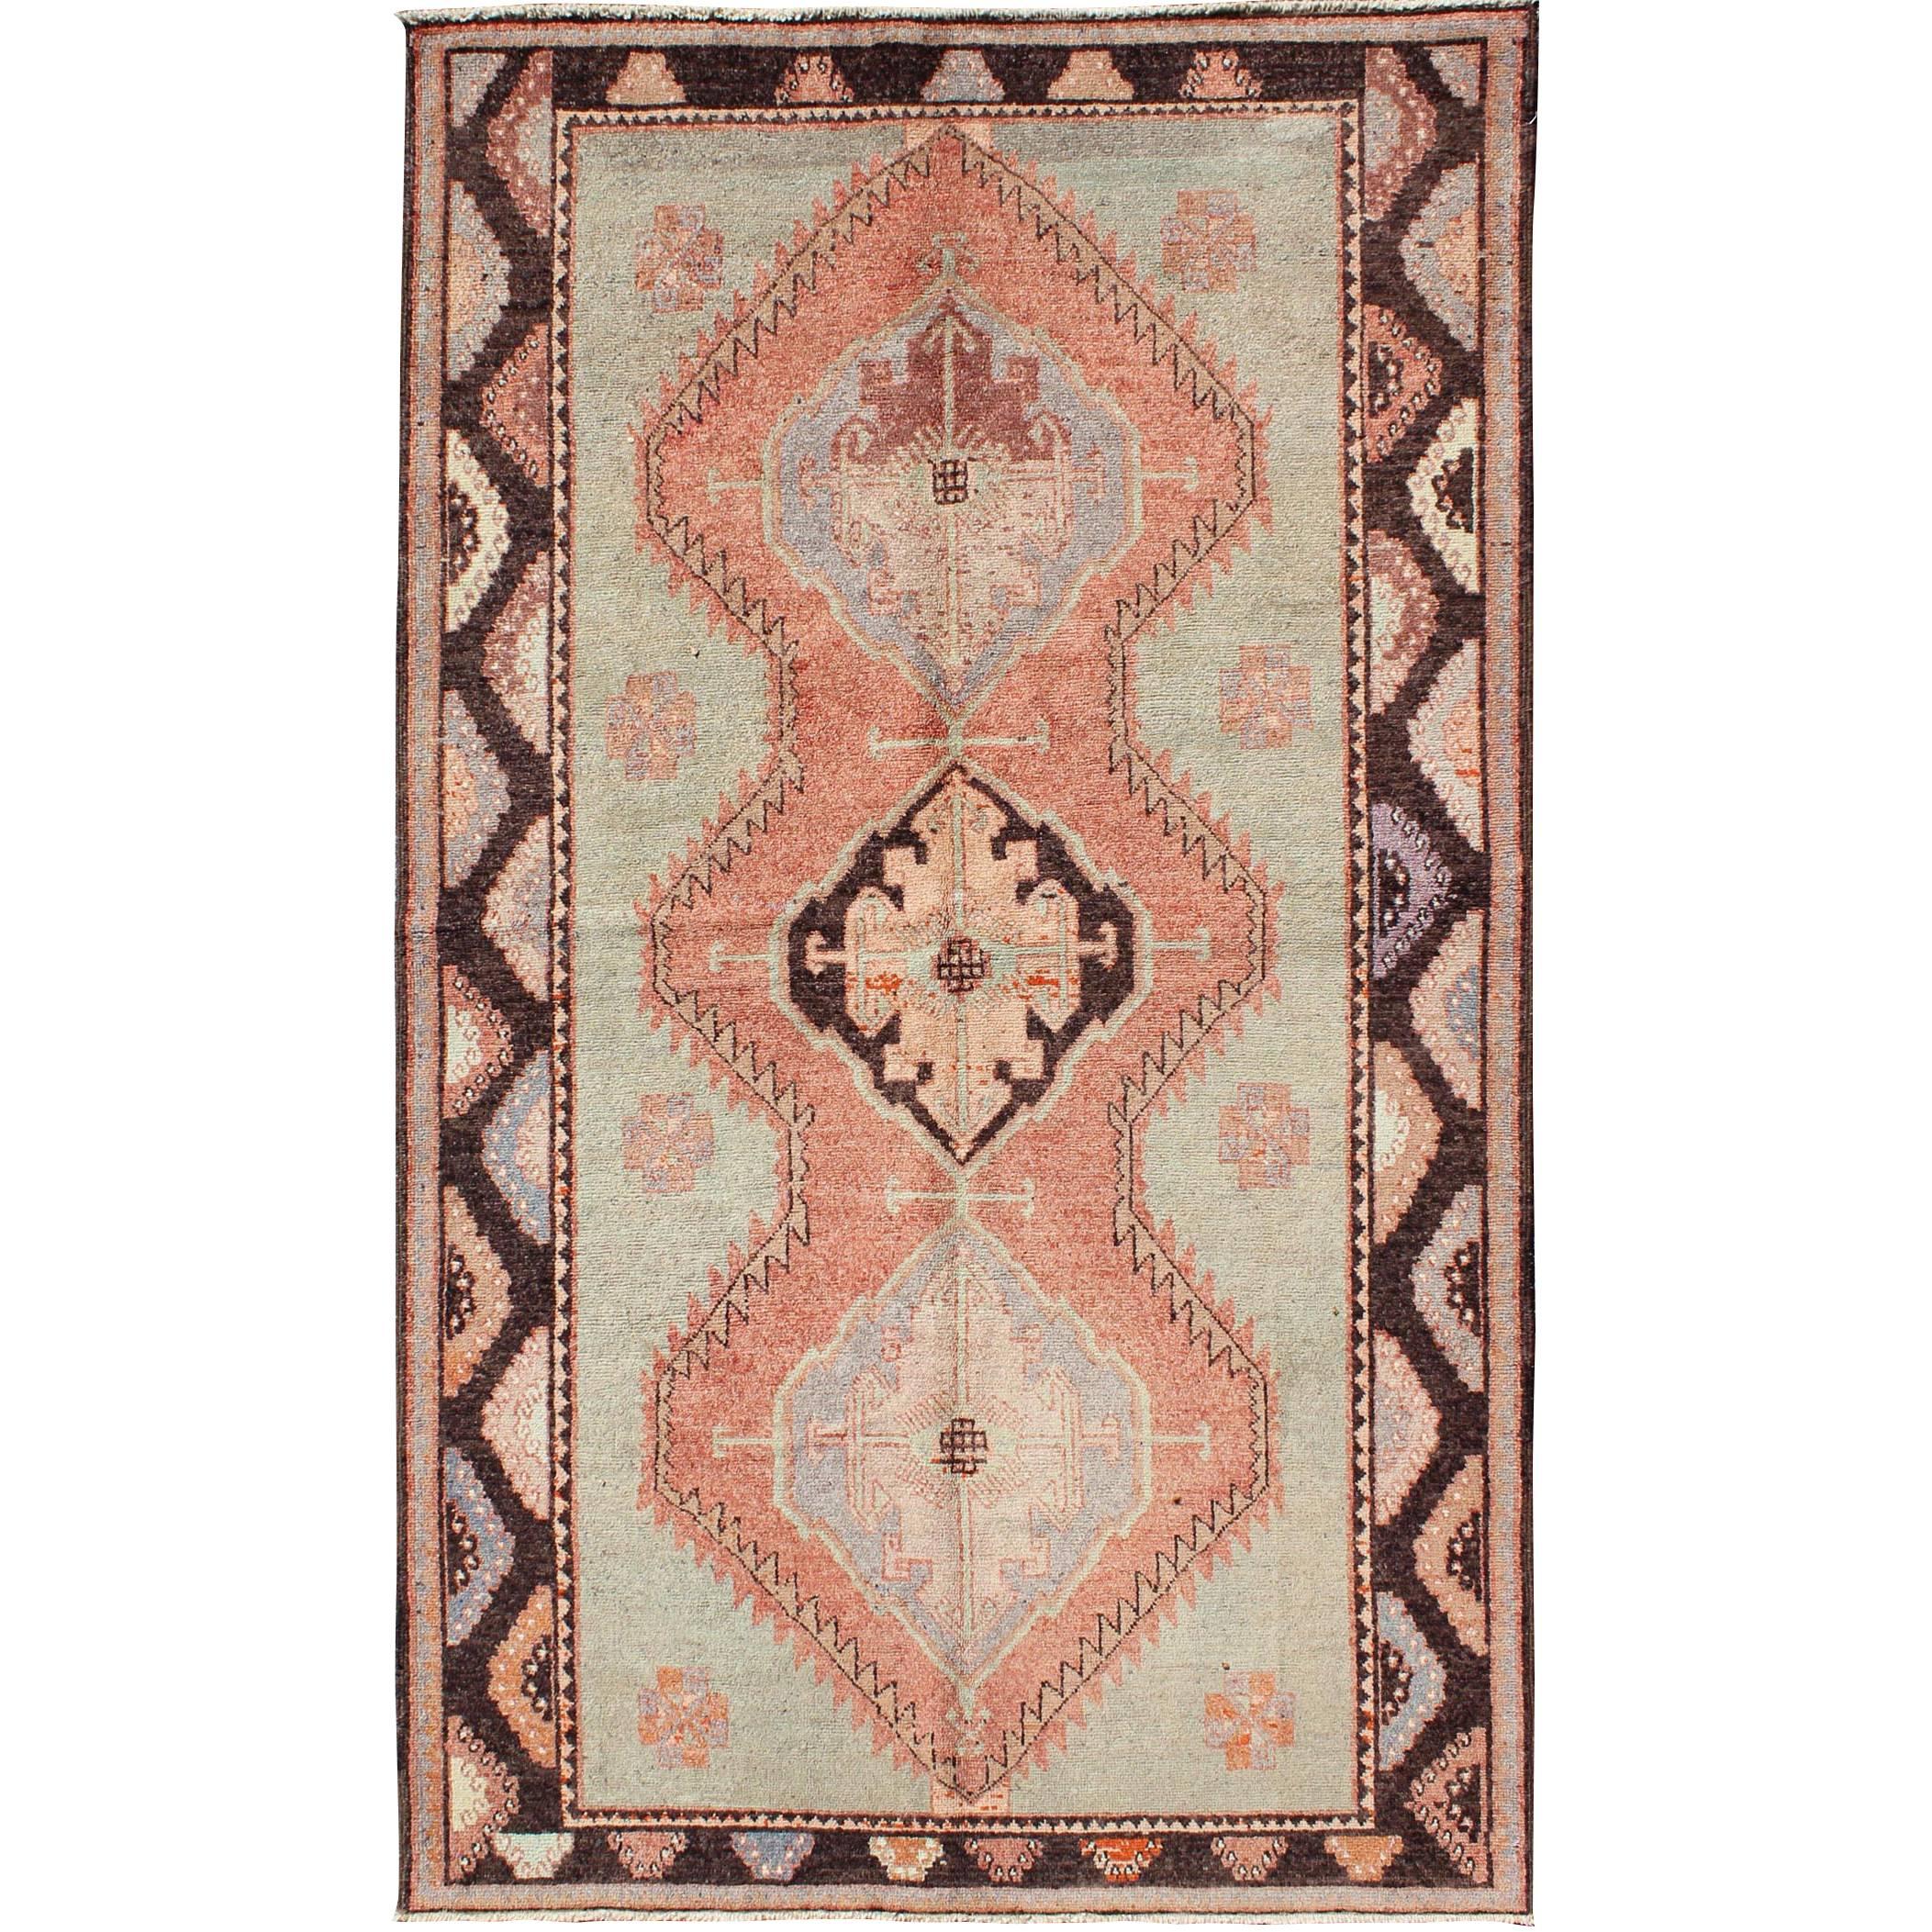 Turkish Oushak Rug with Geometric in Tangerine, Green and Brown